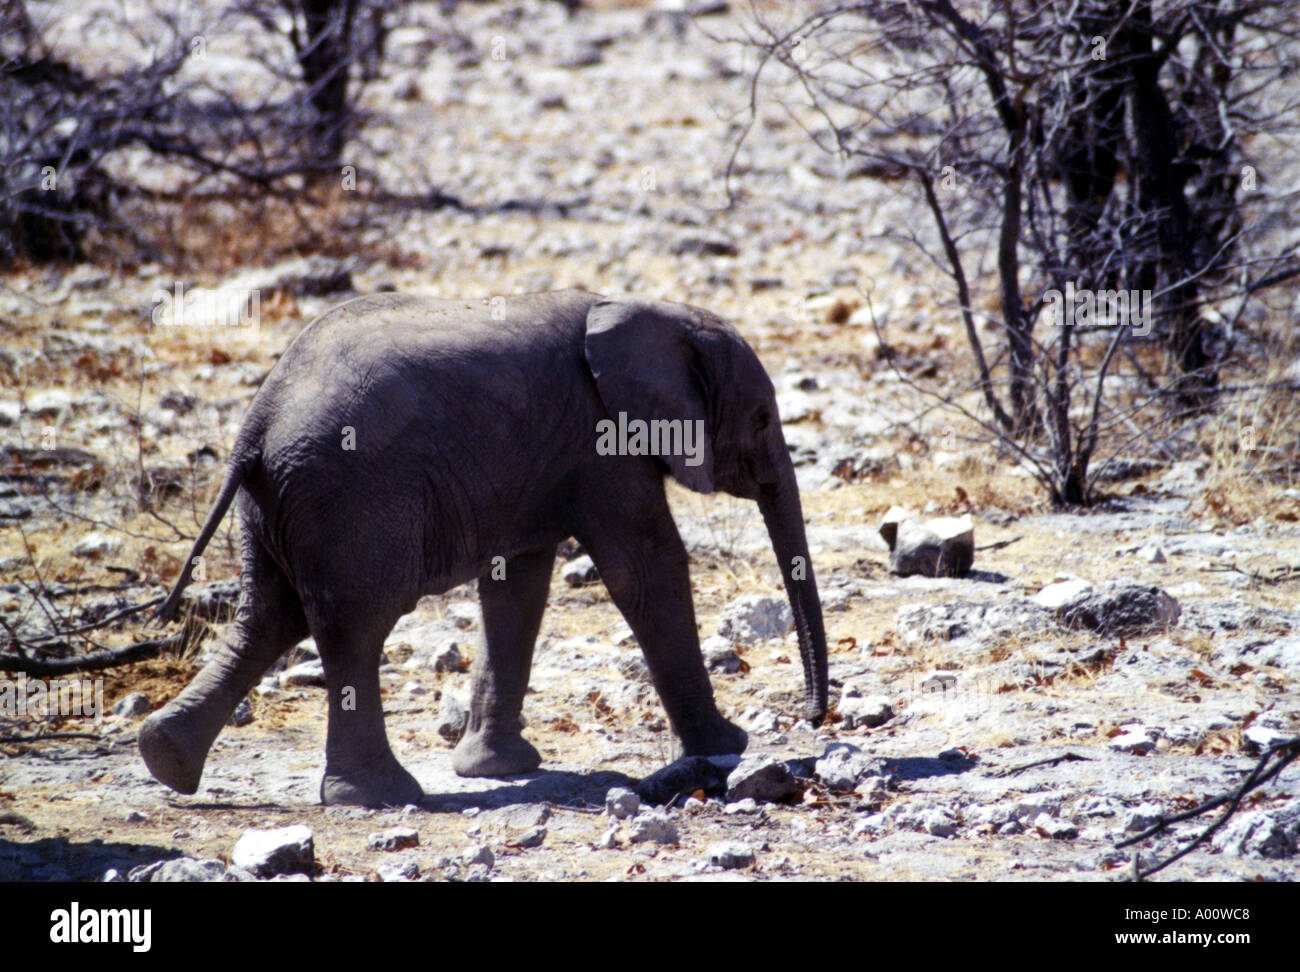 Baby Elephant running in profile Kruger NP South Africa Stock Photo